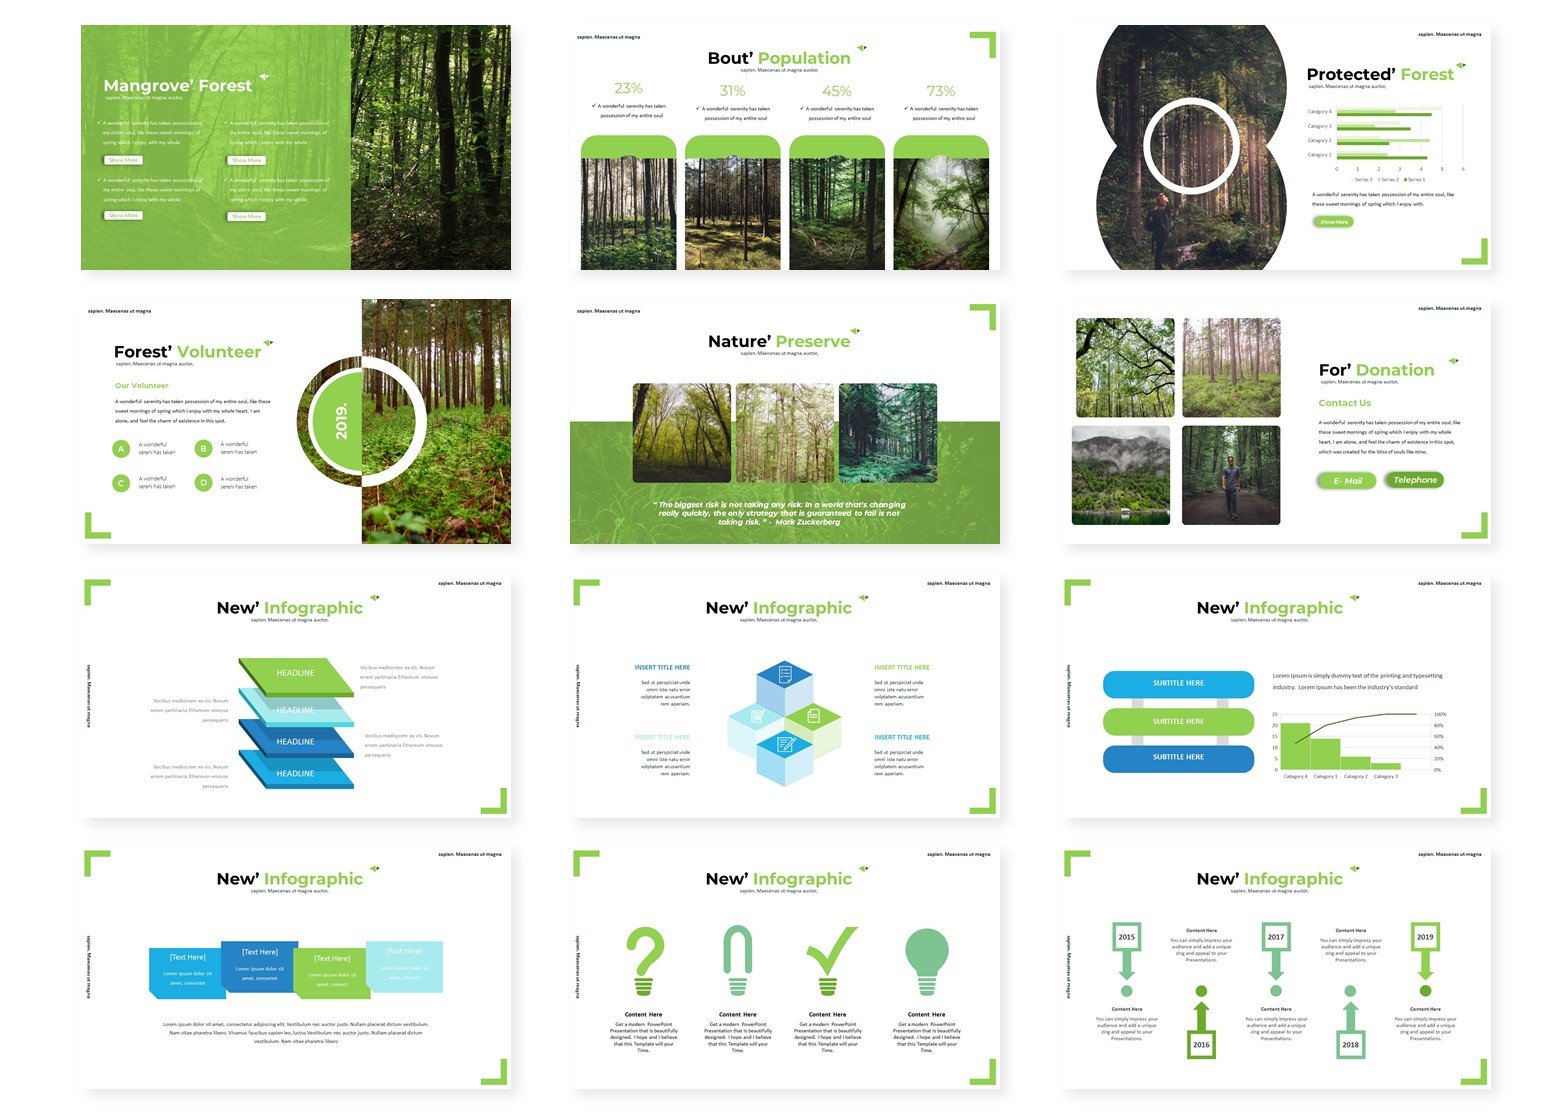 The Forest - Google Slides Template.